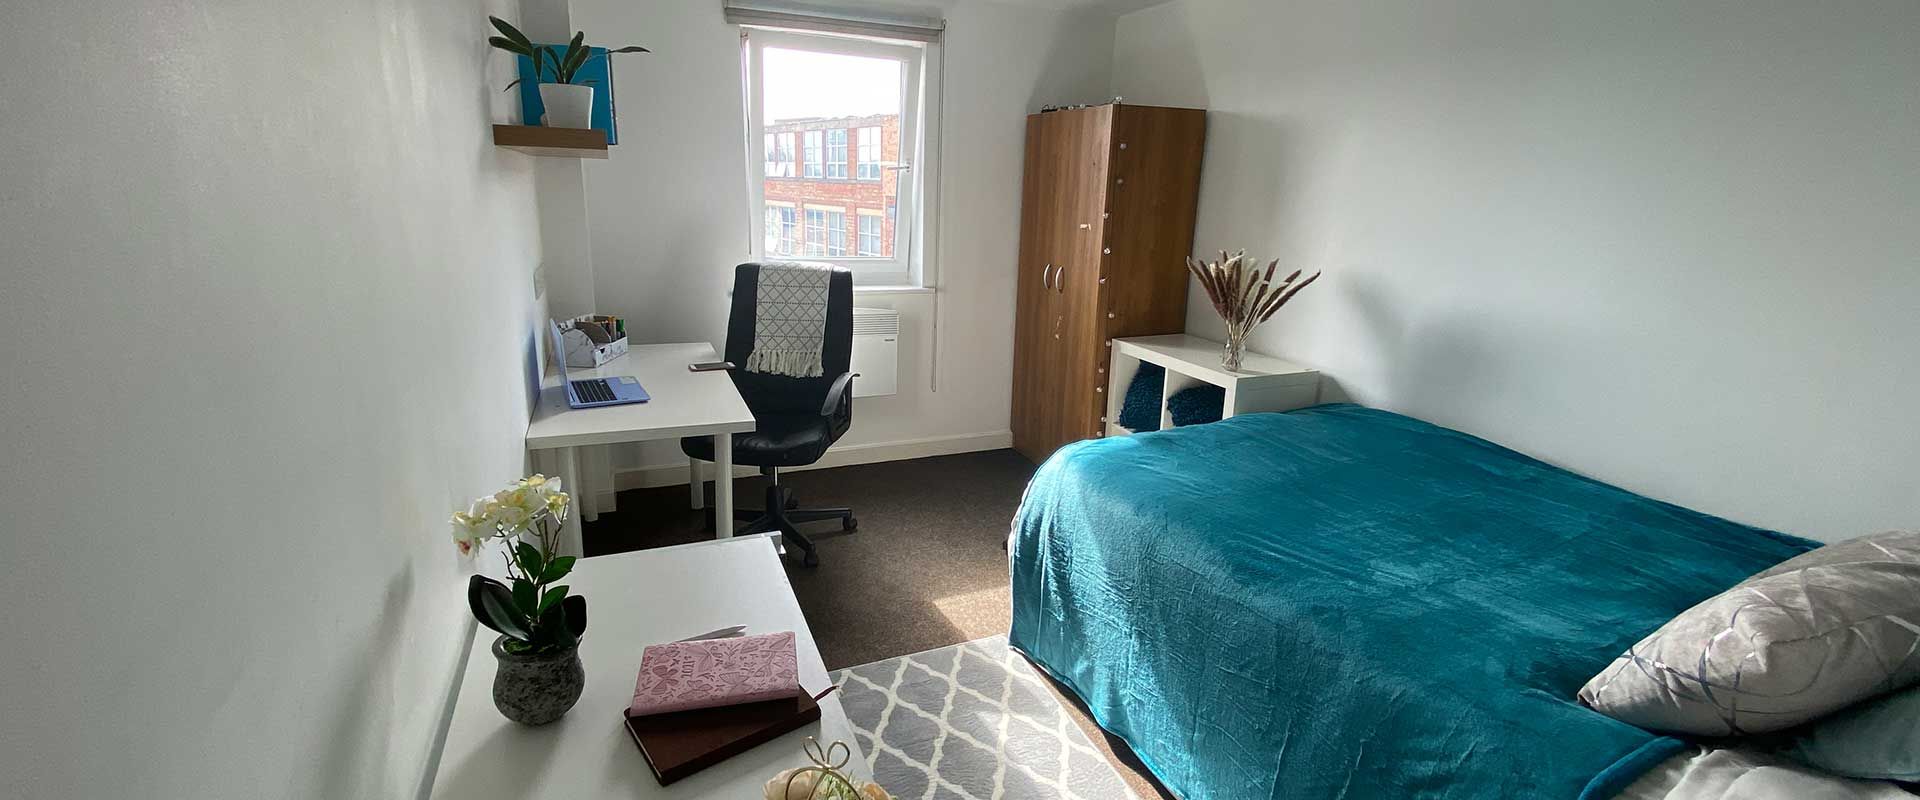 The Student Block Loughborough Accommodation - Affordable and spacious ensuite rooms to support you through university